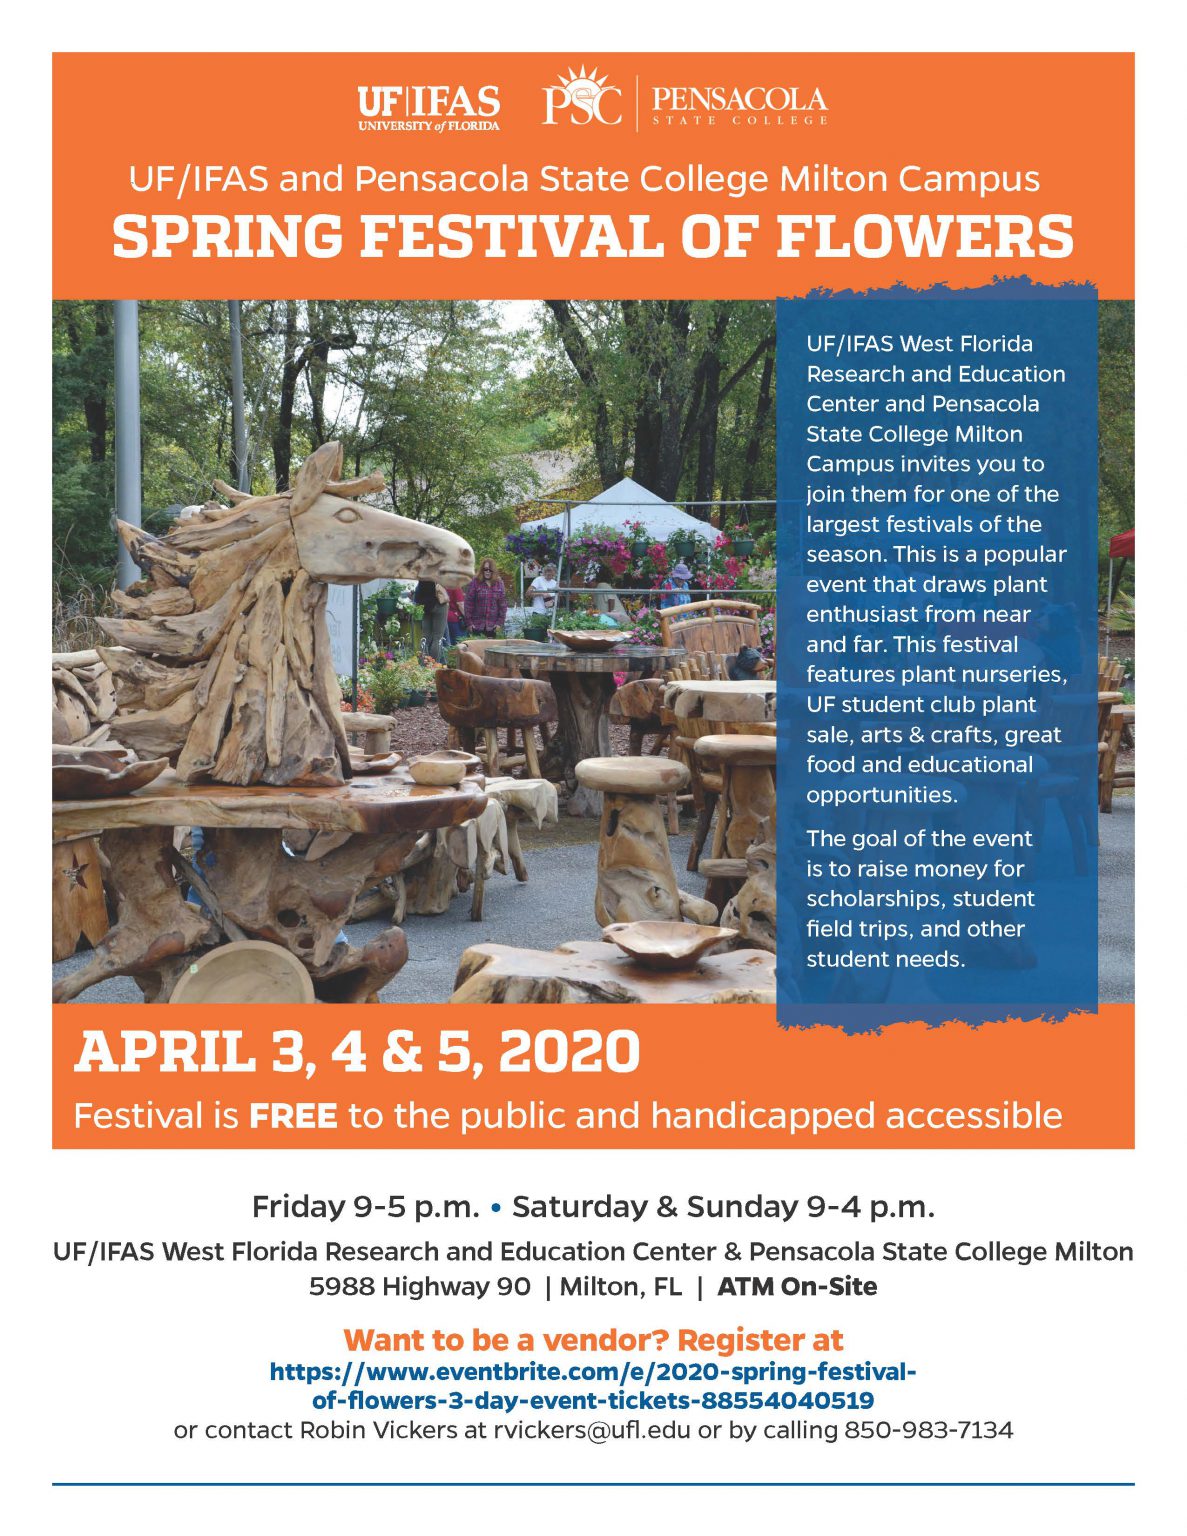 Mark Your Calendar for the 2020 Spring Festival of Flowers of April 3